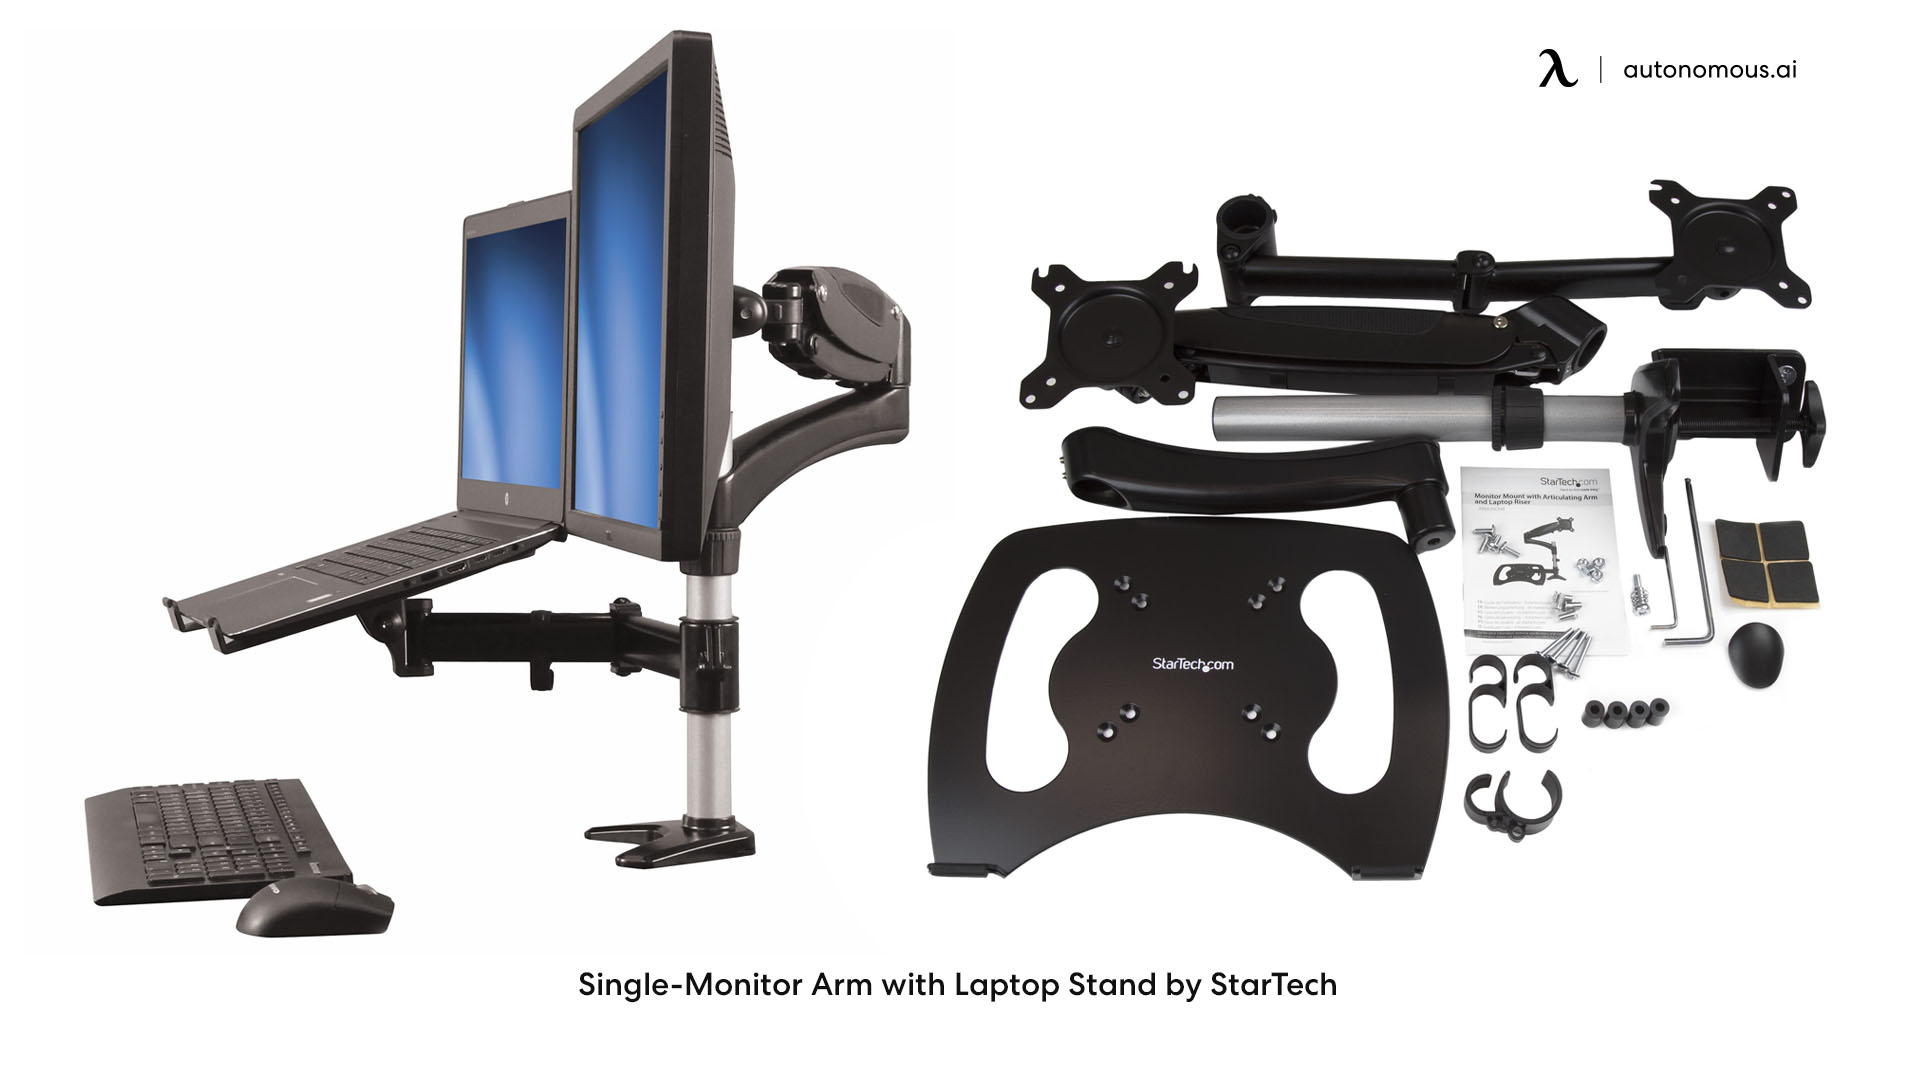 Single-Monitor Arm with Laptop Stand by StarTech